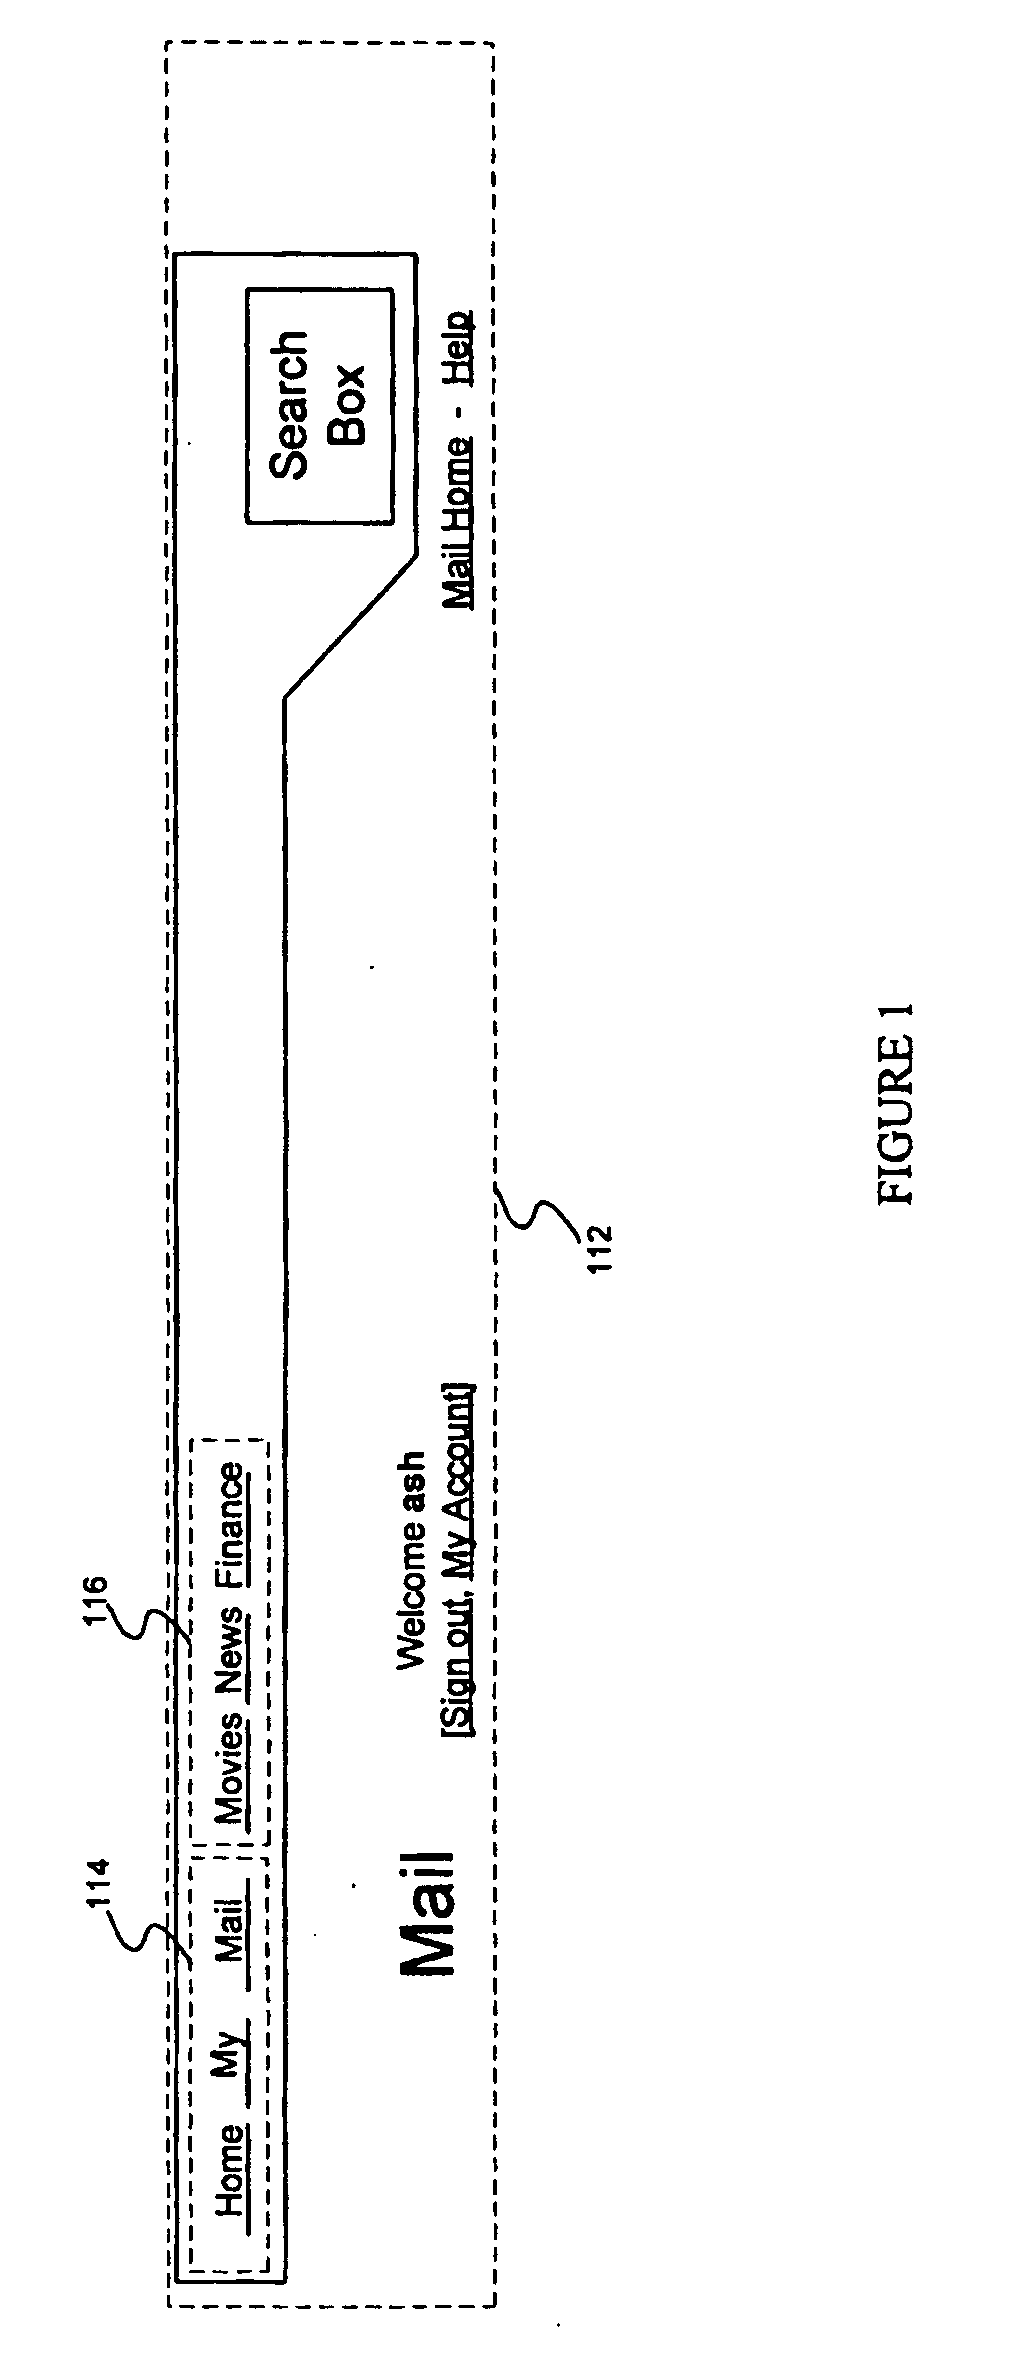 Method and apparatus for adaptive personalization of navigation